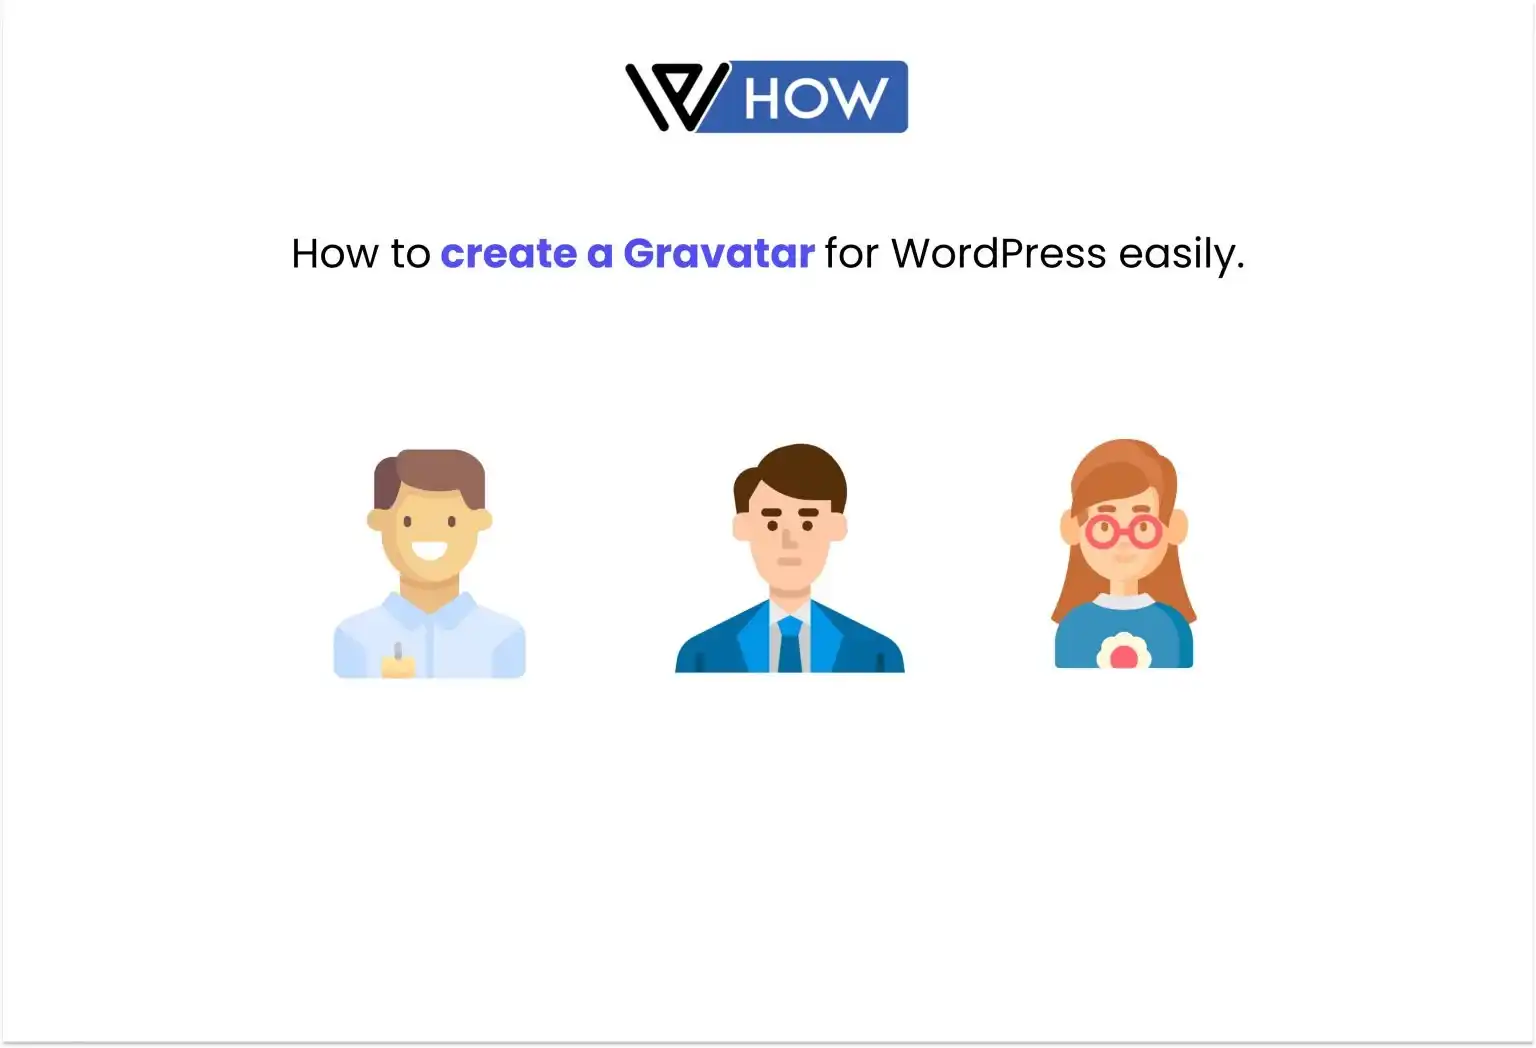 How to create a Gravatar for WordPress easily - Title Image